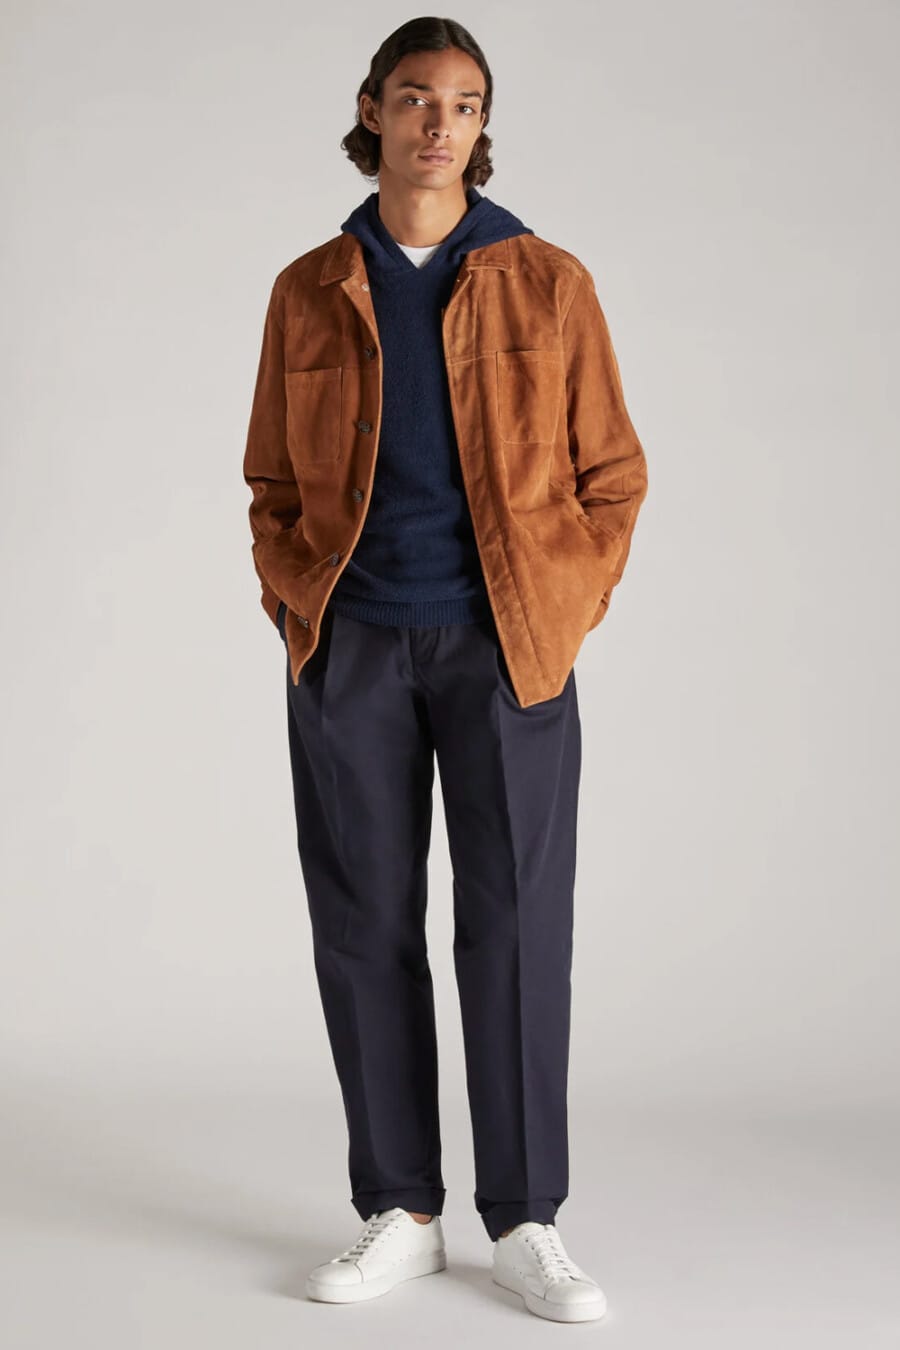 Men's wide-leg navy pants, white T-shirt, navy hoodie, tan suede overshirt and white leather sneakers worn sockless outfit